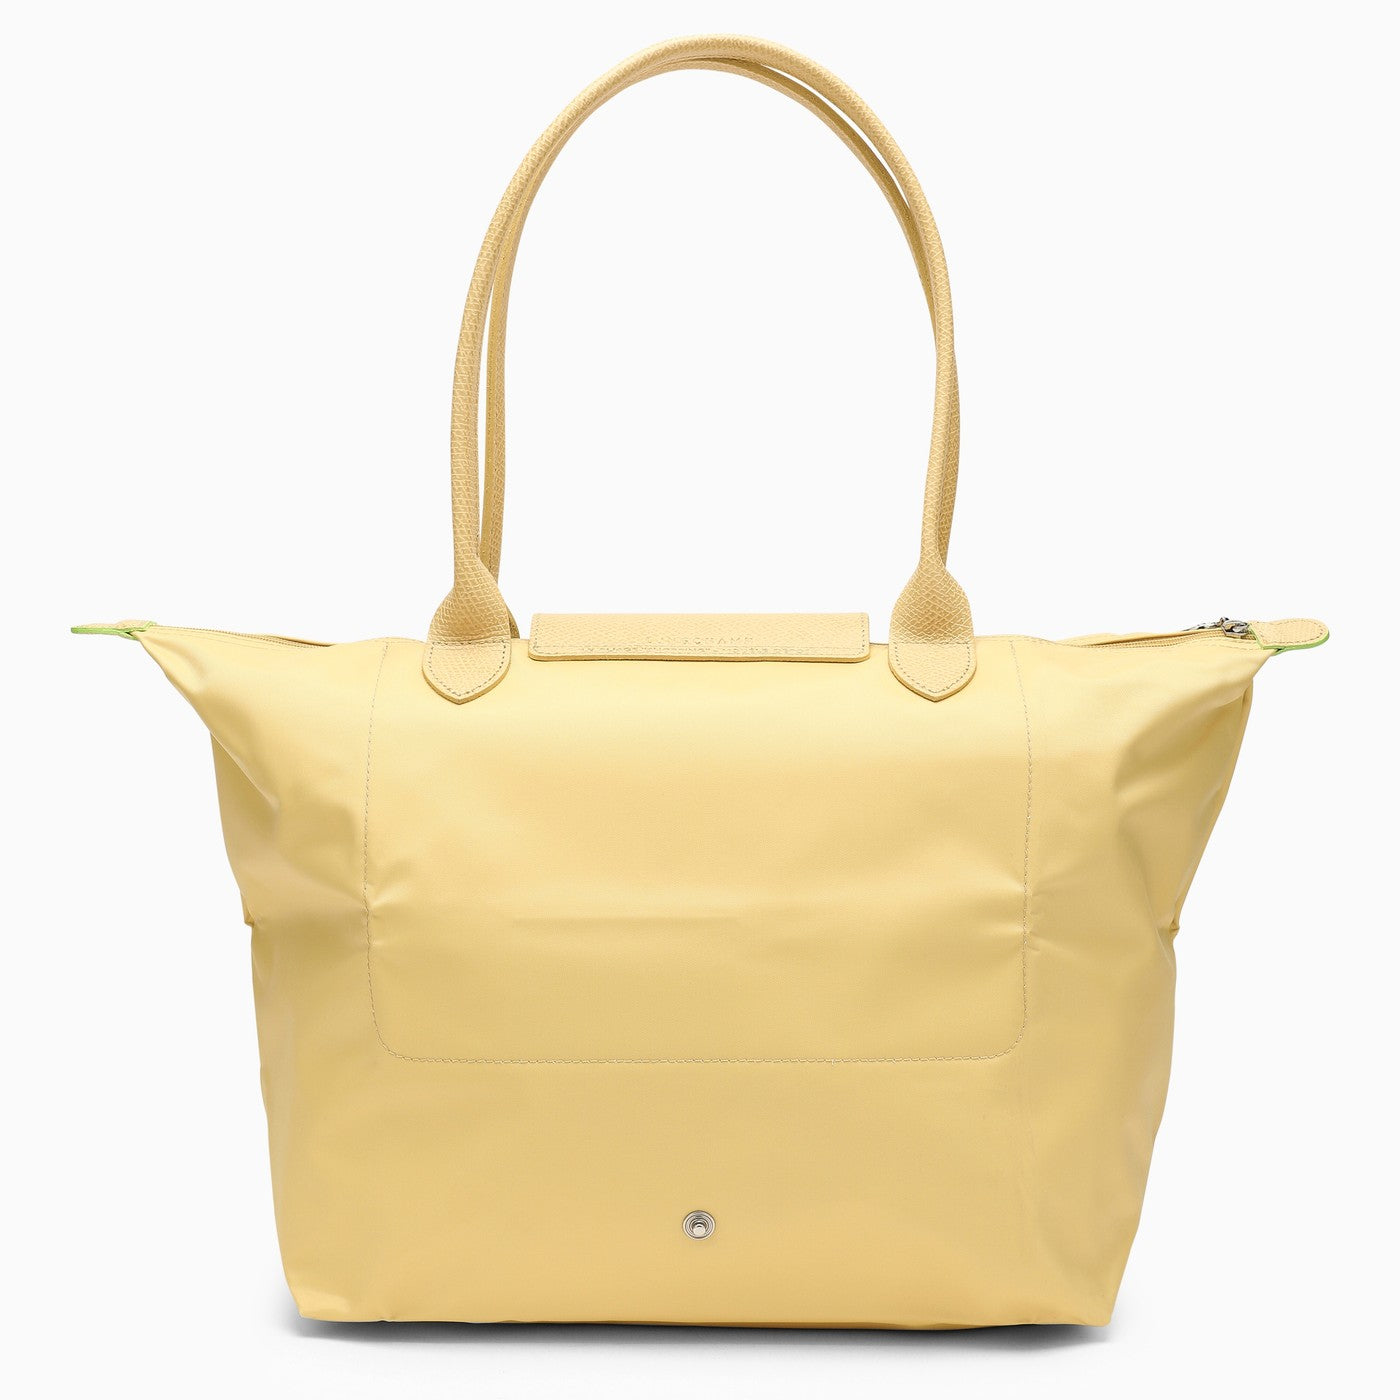 Longchamp pouch with handle in Wheat